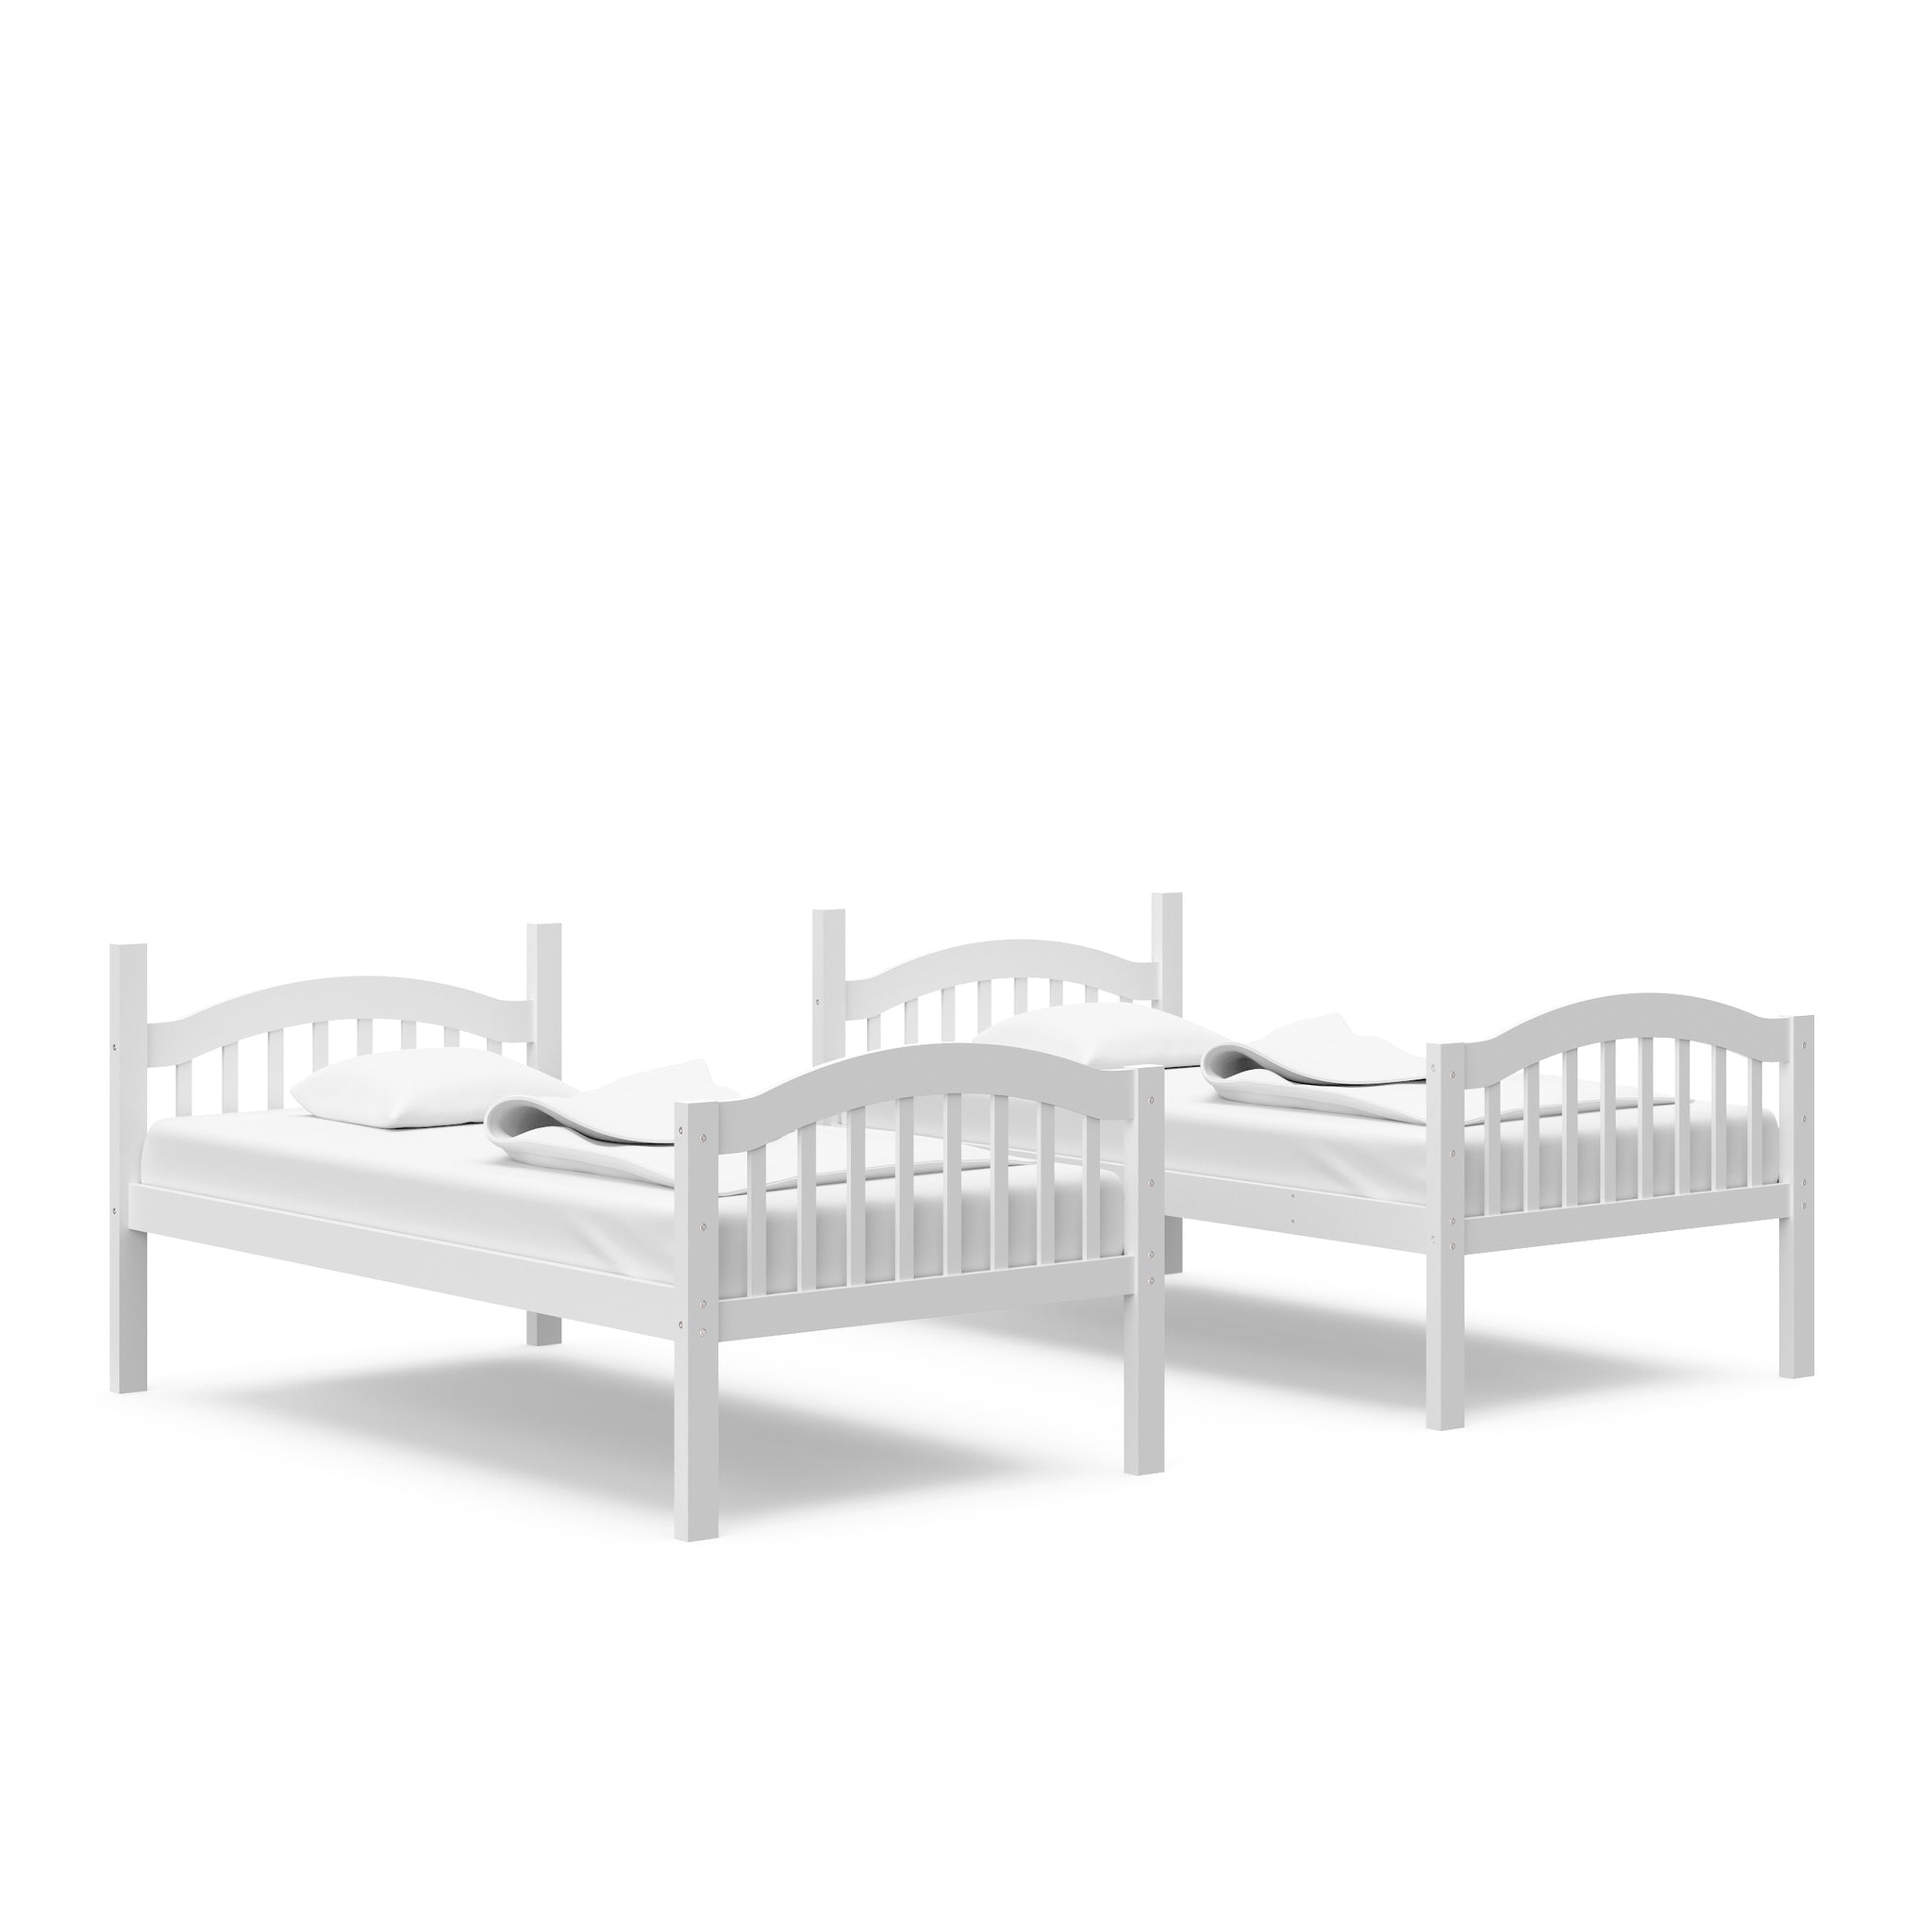 white bunk bed configured as two separate twin beds in nursery